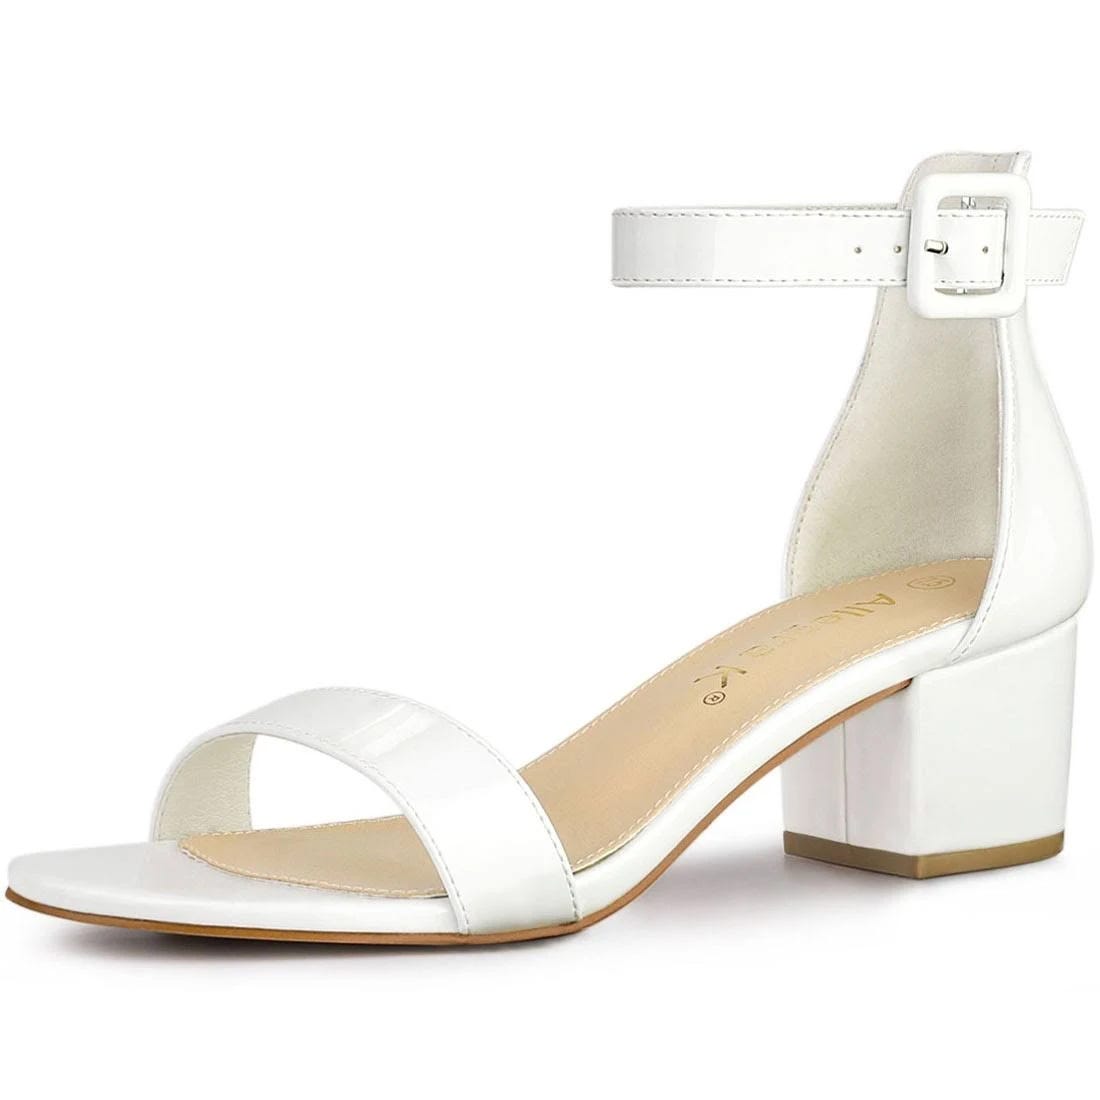 Sleek White Low Heel Block Sandals with Ankle Strap for Stylish Comfort | Image